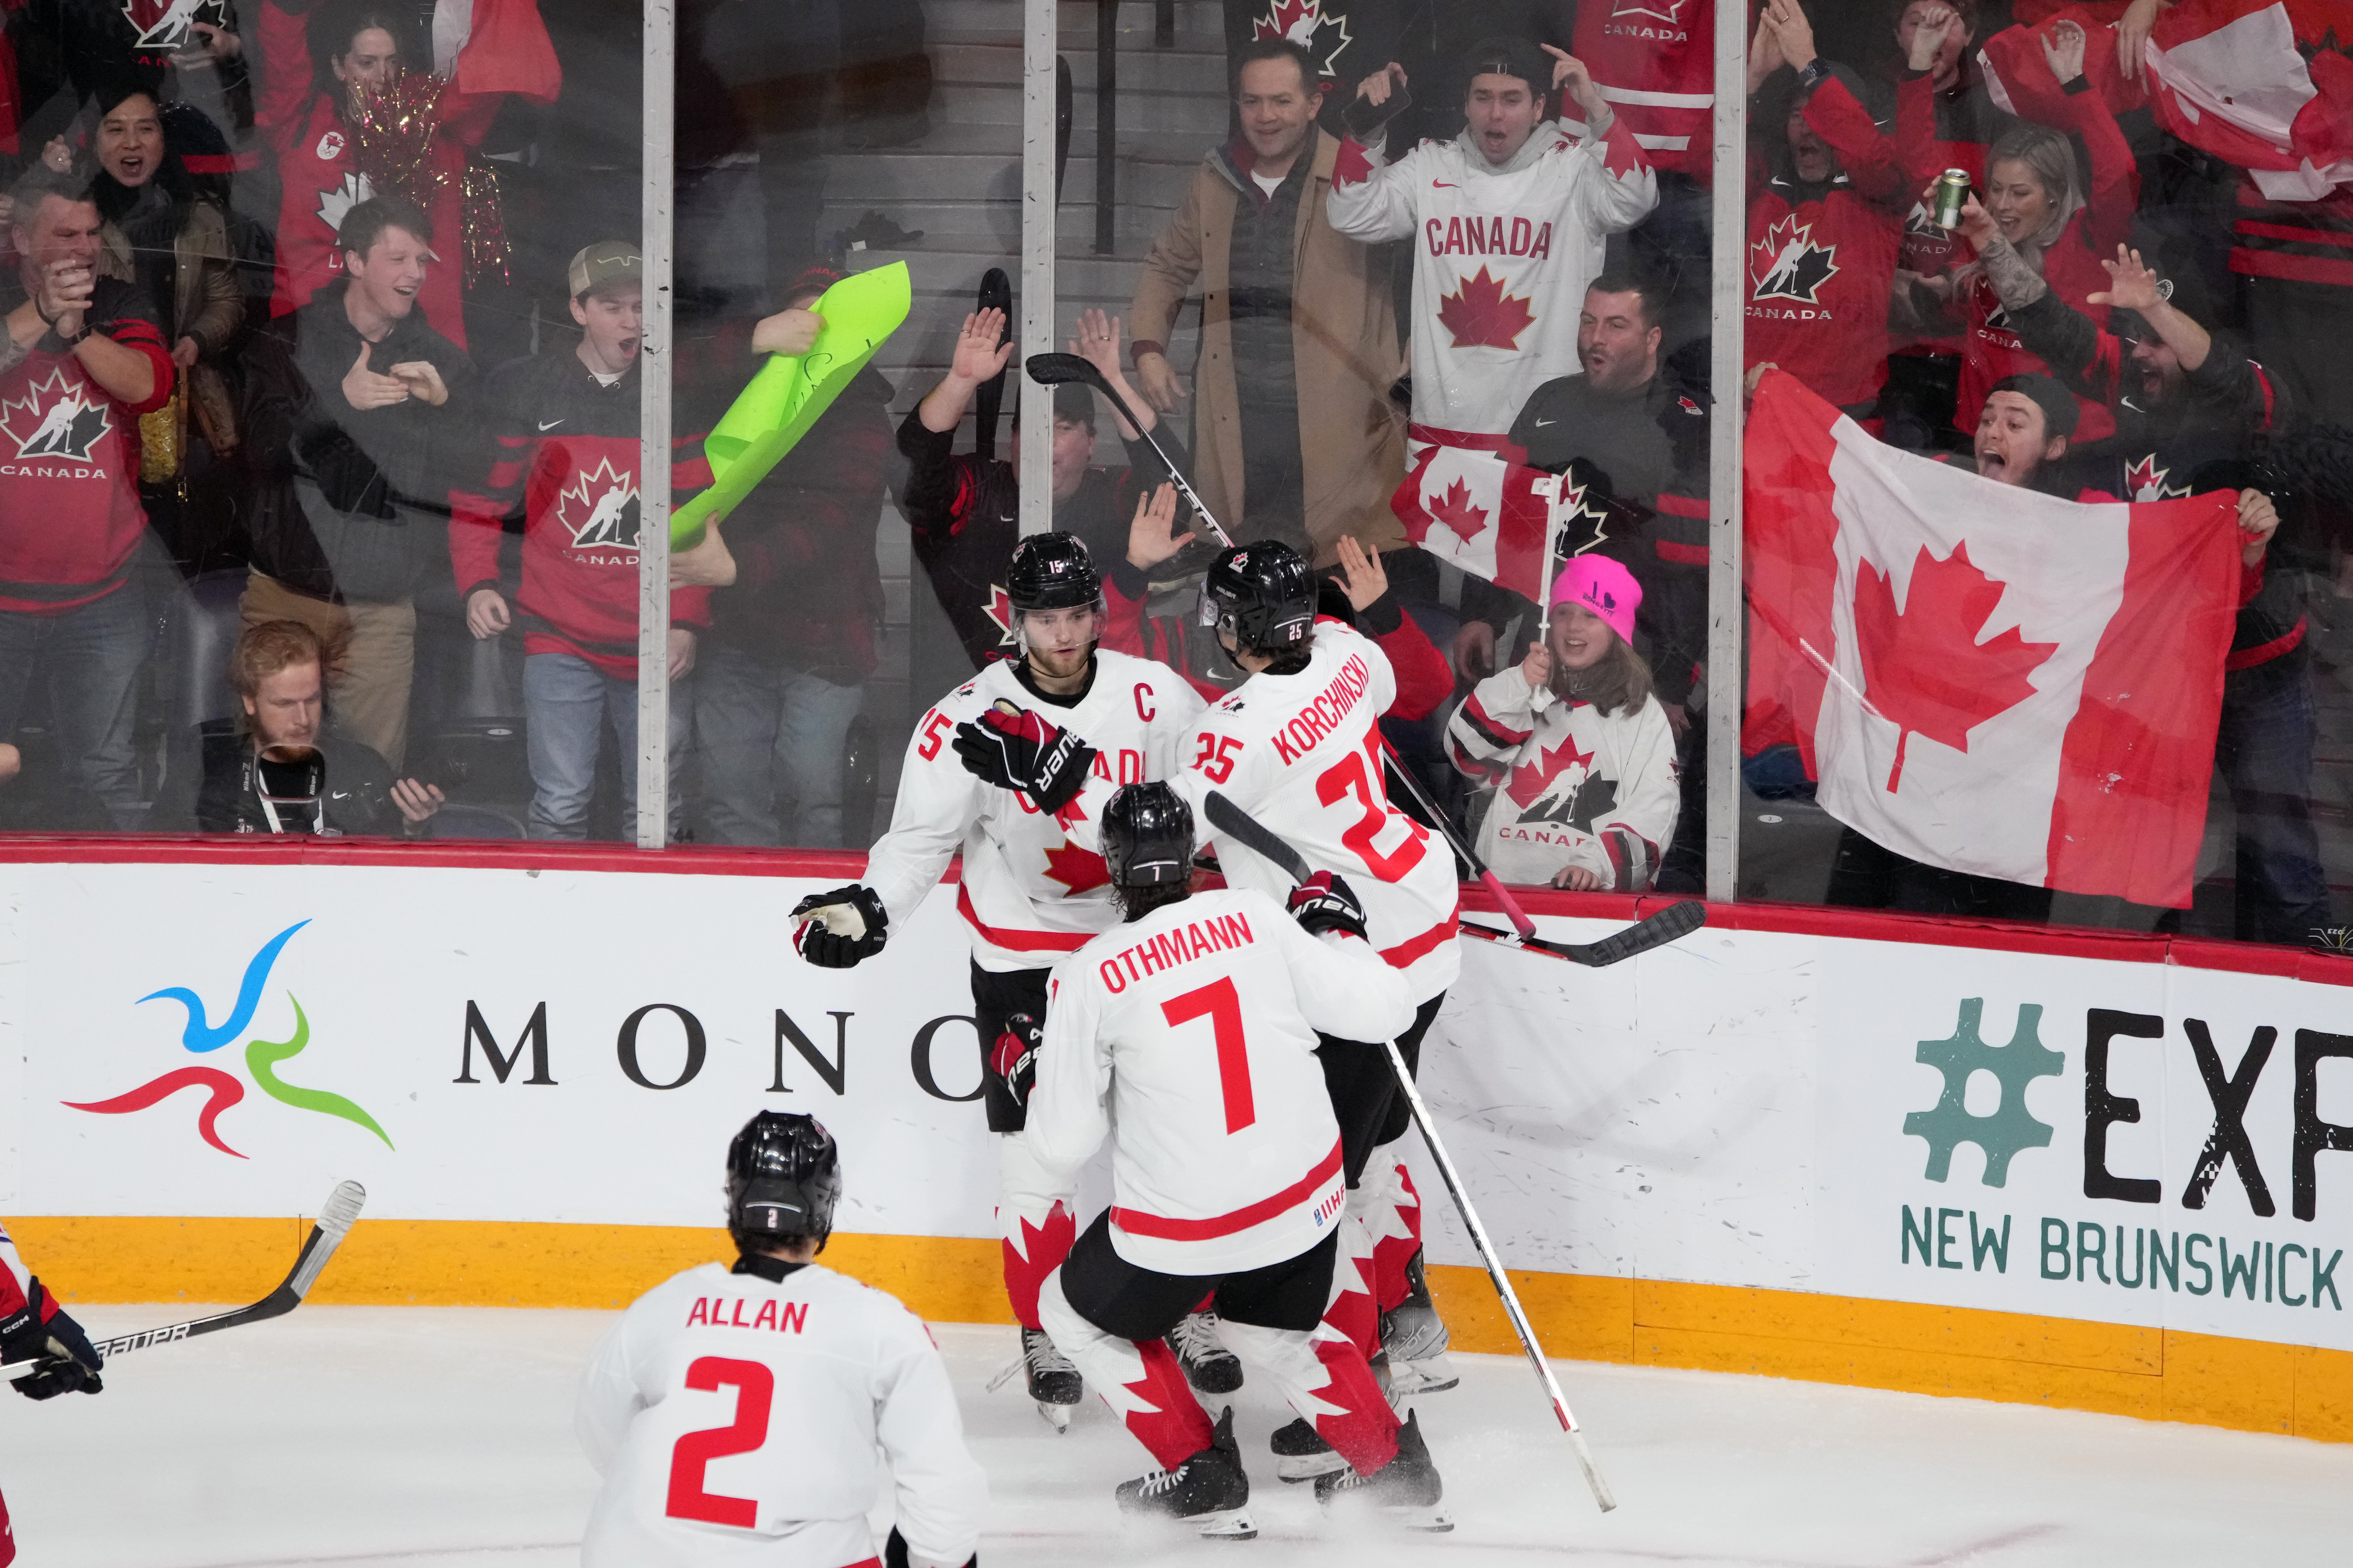 Canada claims 20th World Junior gold after 3-2 win against Czechia Globalnews.ca